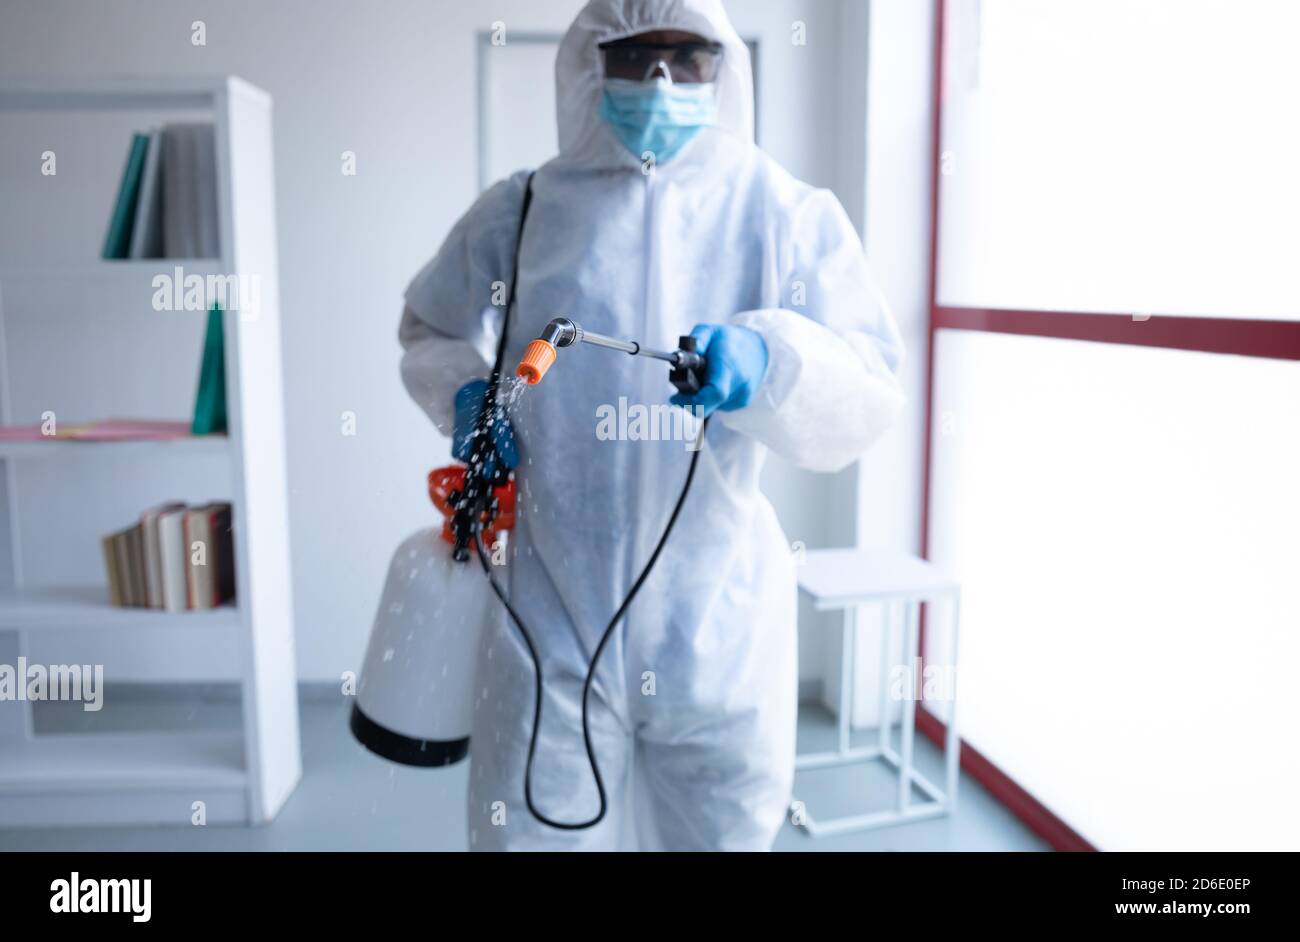 Health worker wearing protective clothes cleaning using disinfectant Stock Photo